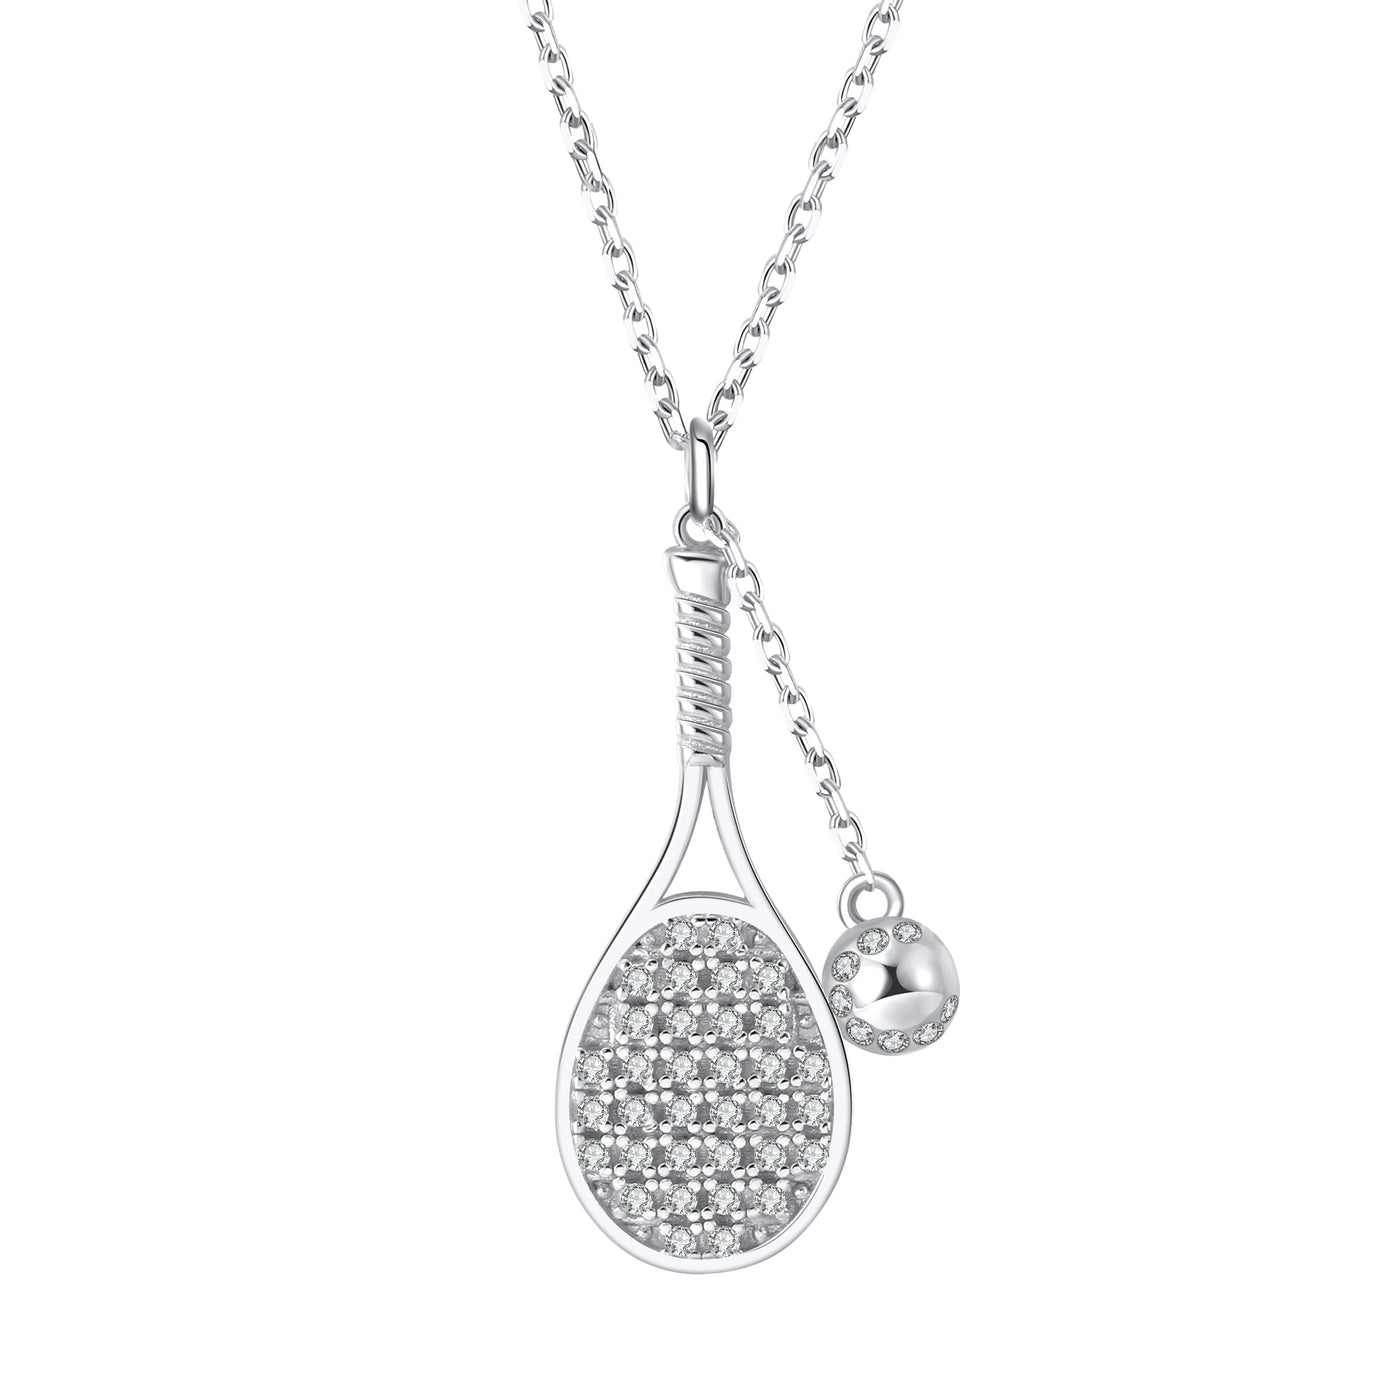 TENNIS NECKLACE RACKET CRYSTALS BALL 